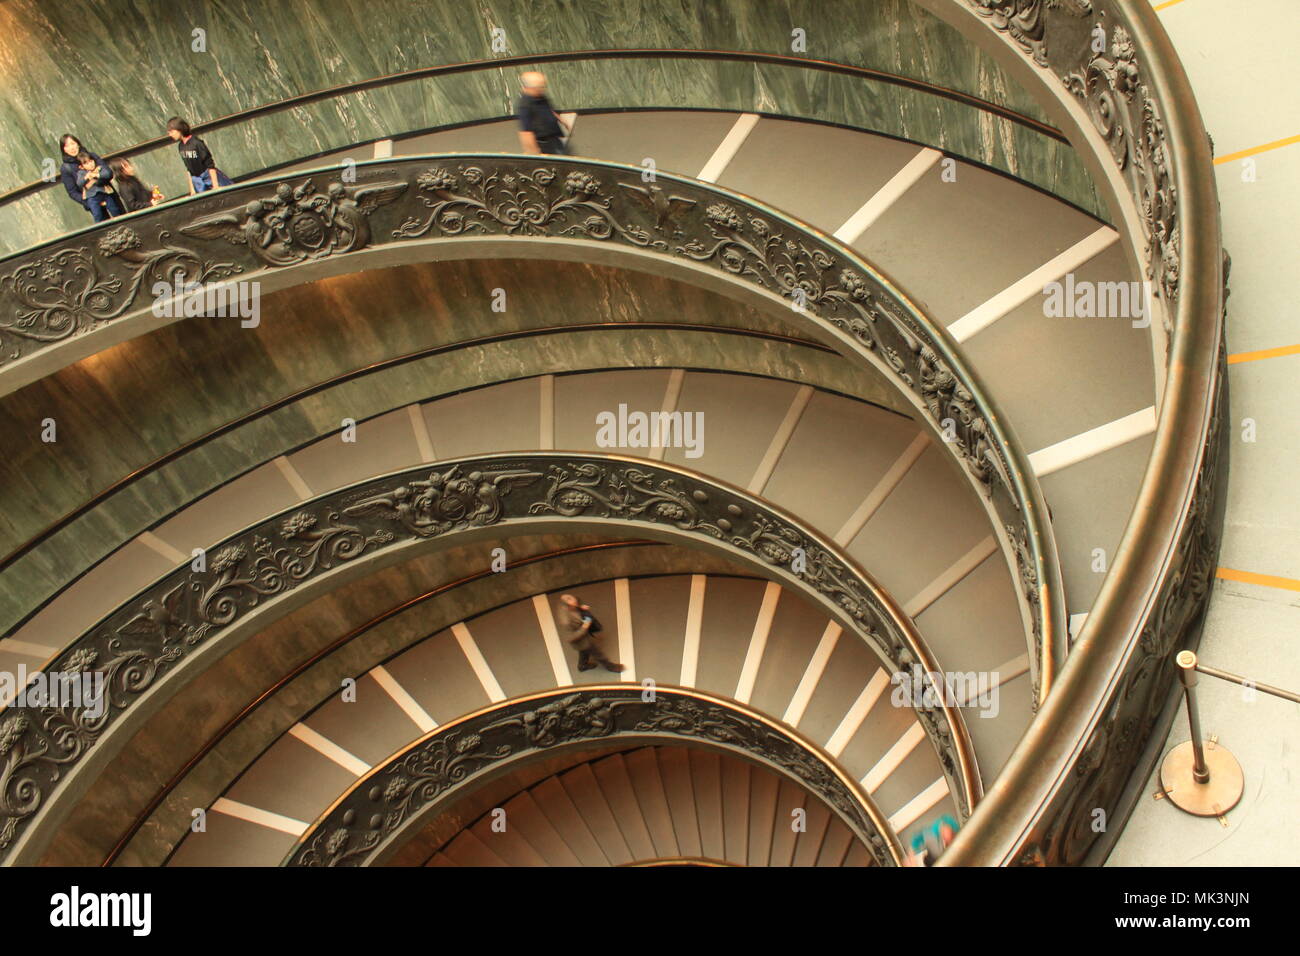 Spiral Staircase at the Vatican City Stock Photo